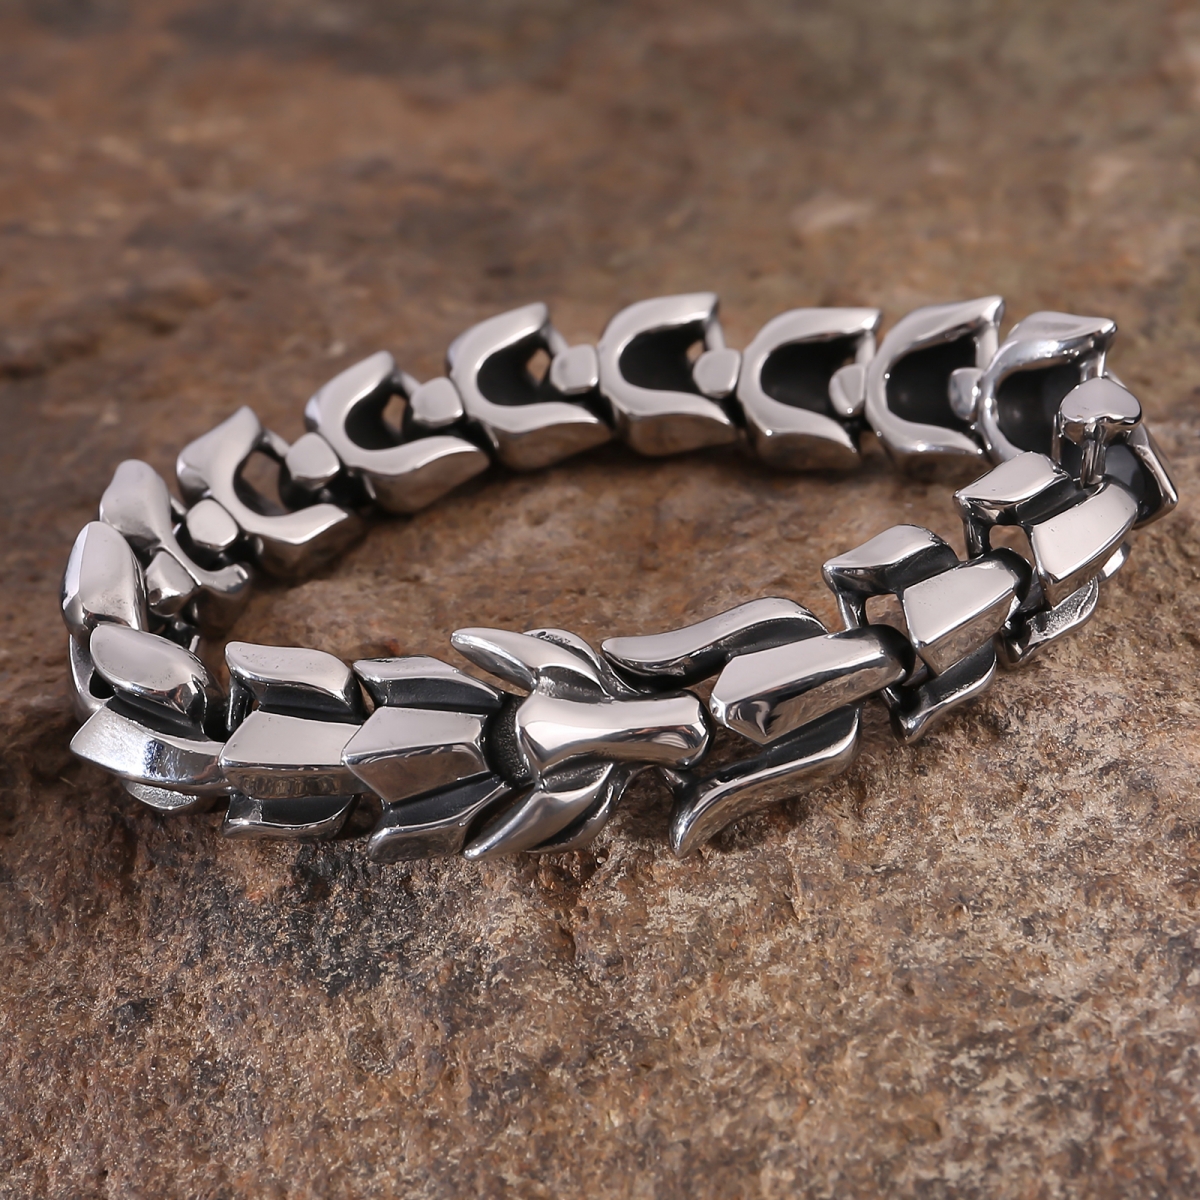 Viking chunky bracelet silver color solid stainless steel jewelry-NORSECOLLECTION- Viking Jewelry,Viking Necklace,Viking Bracelet,Viking Rings,Viking Mugs,Viking Accessories,Viking Crafts